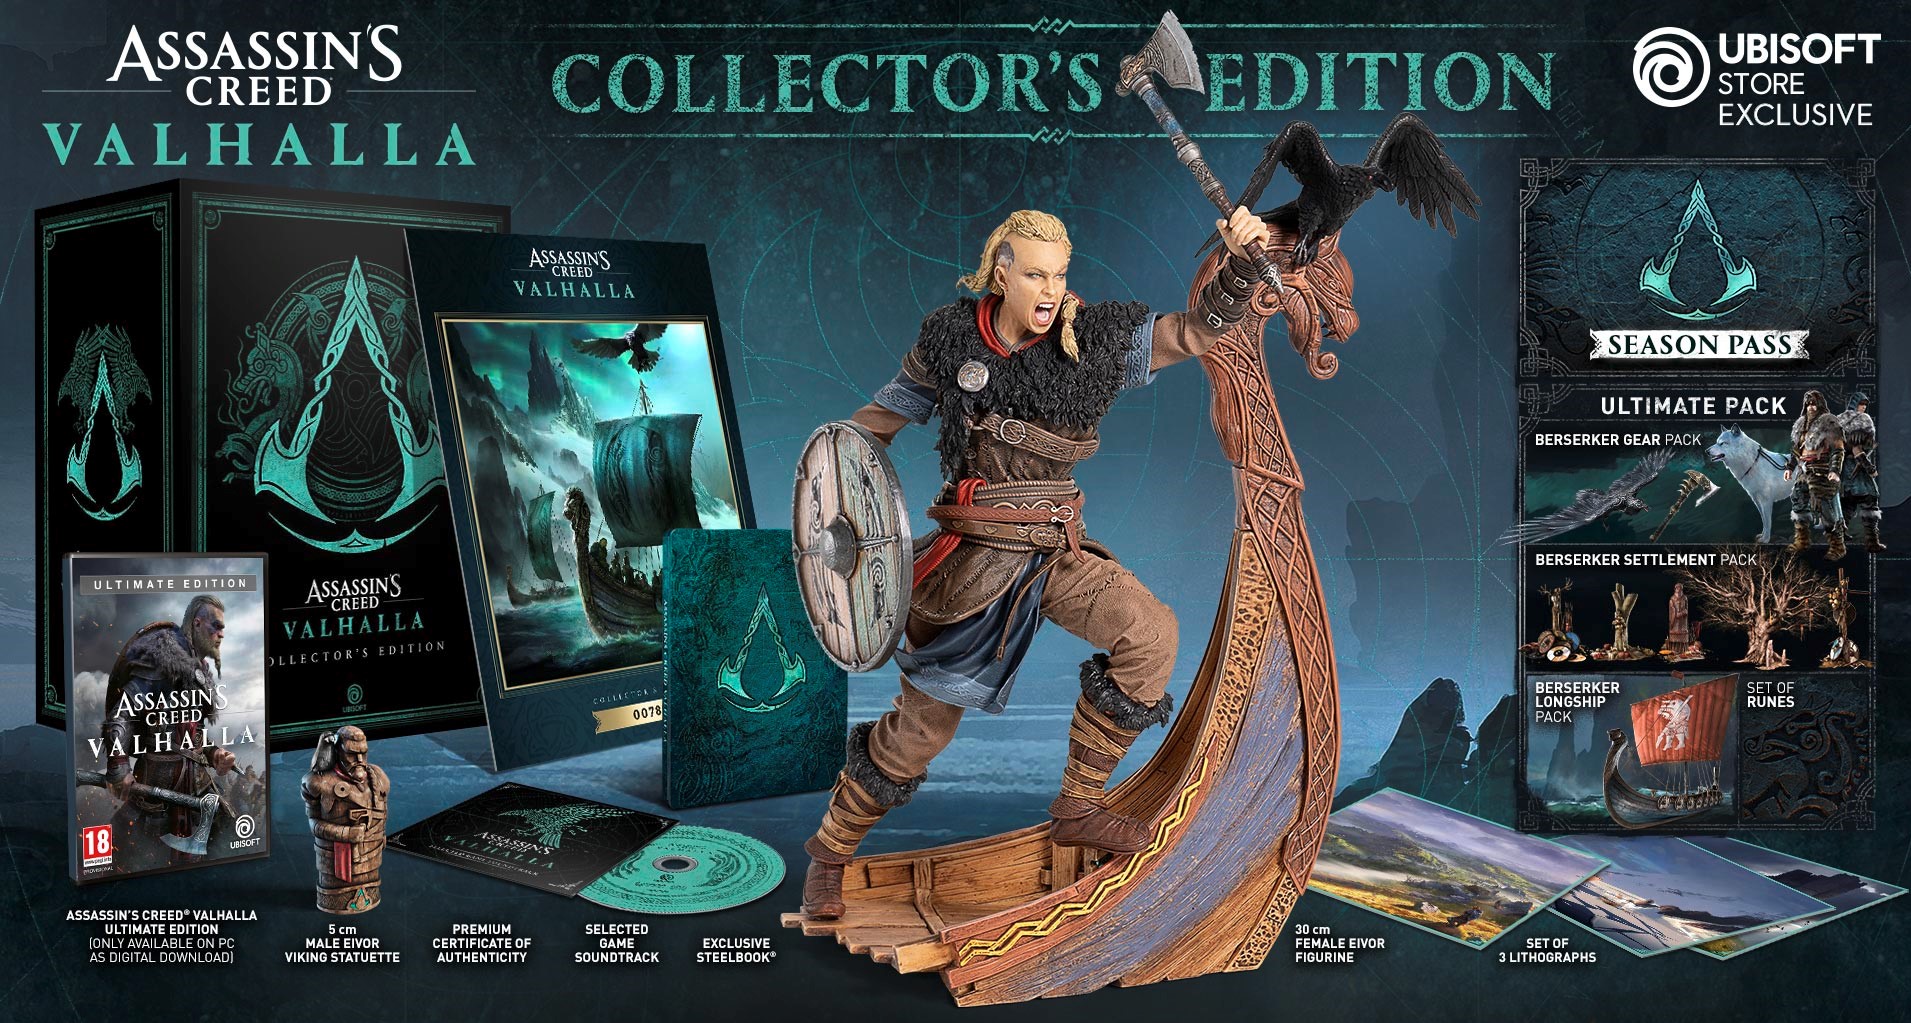 Here S Your Chance To Win The Assassin S Creed Valhalla Collector S Edition Pc Gamer